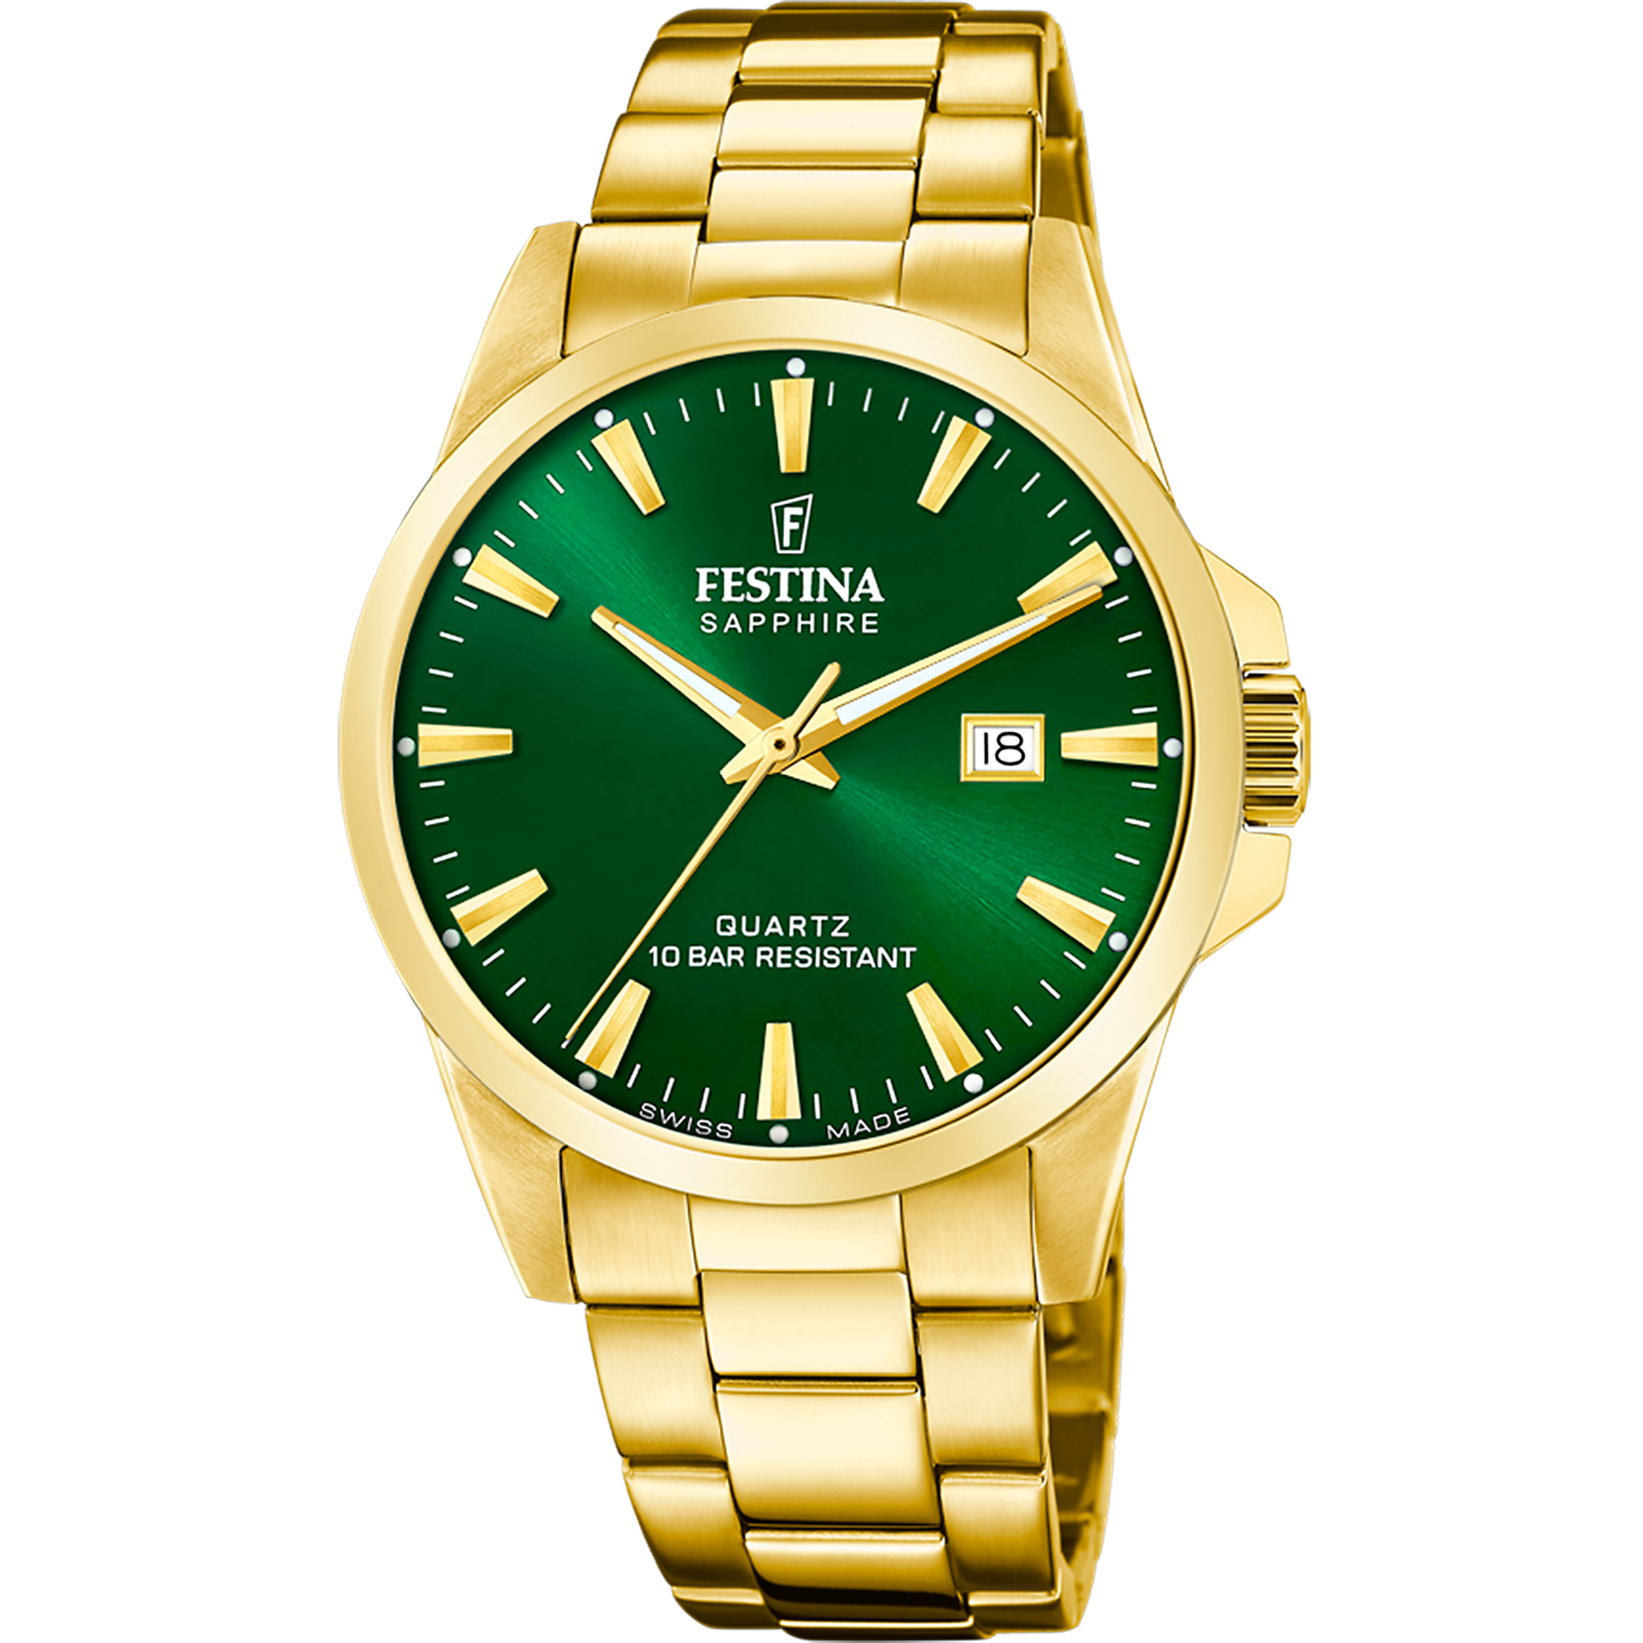 Festina Swiss Made F20044-5 - Analog - Strap Material Stainless Steel I Festina Watches USA